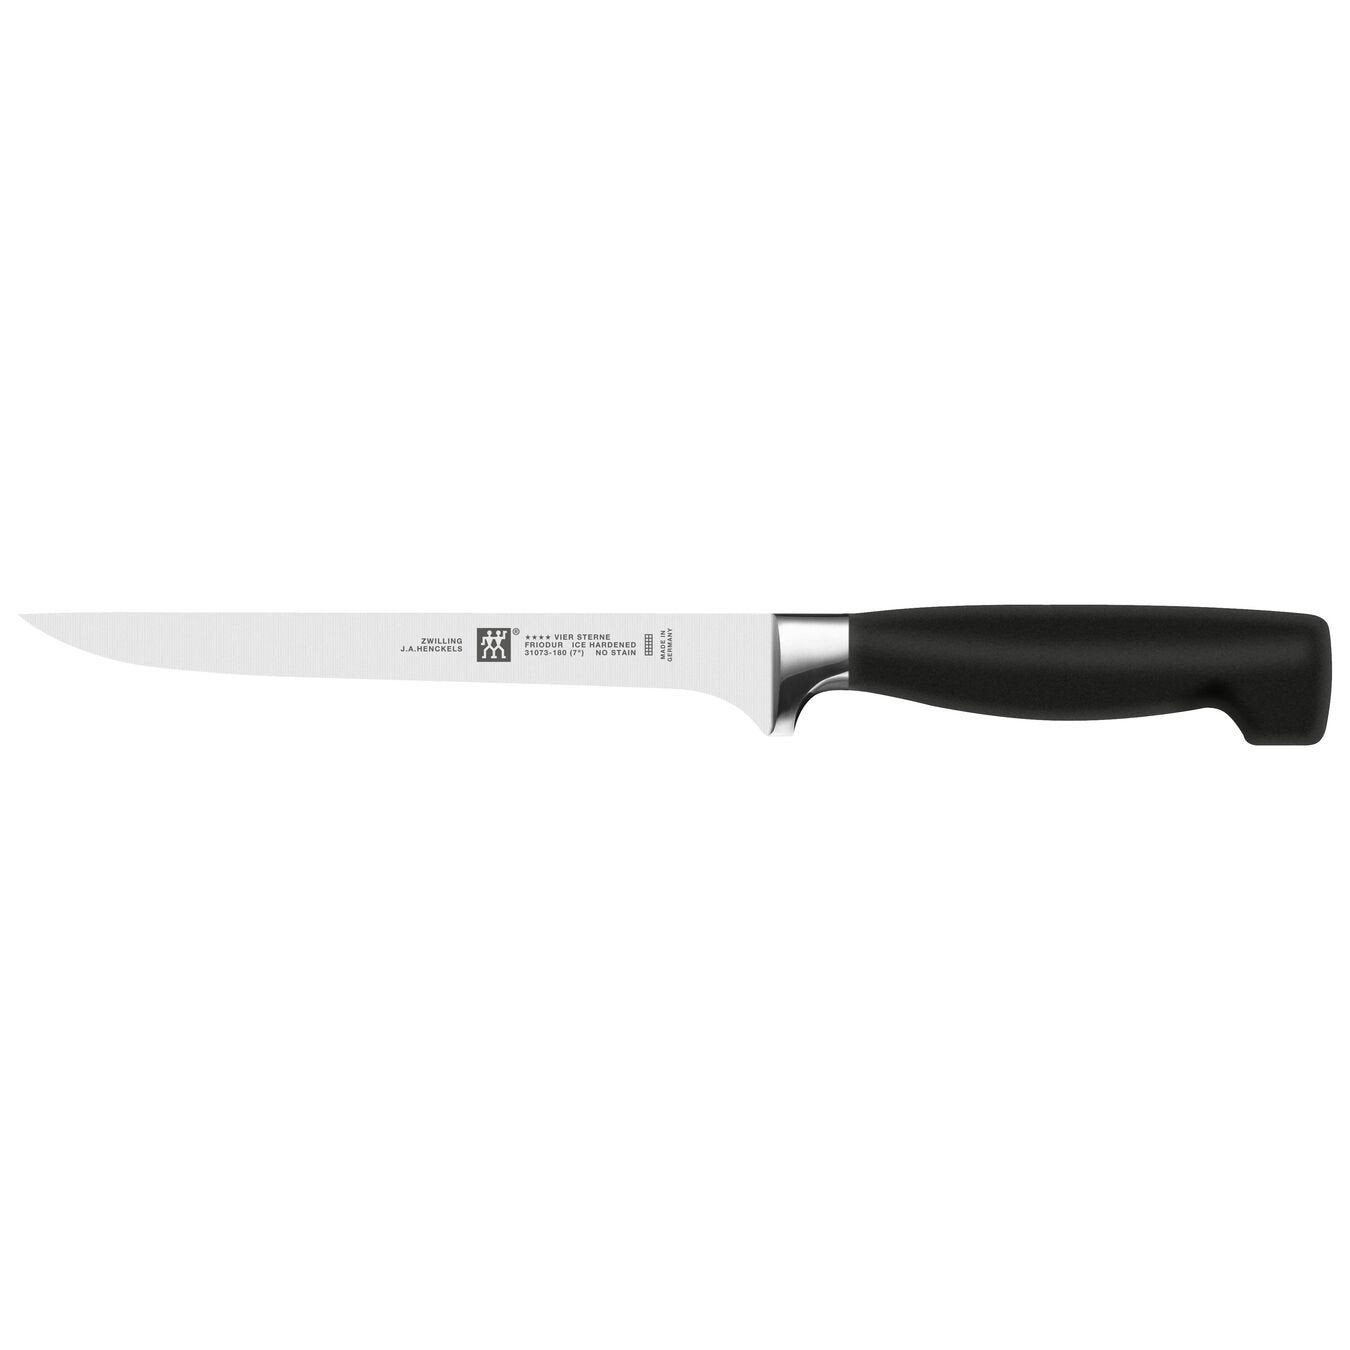 fillet knife with black handle on white background